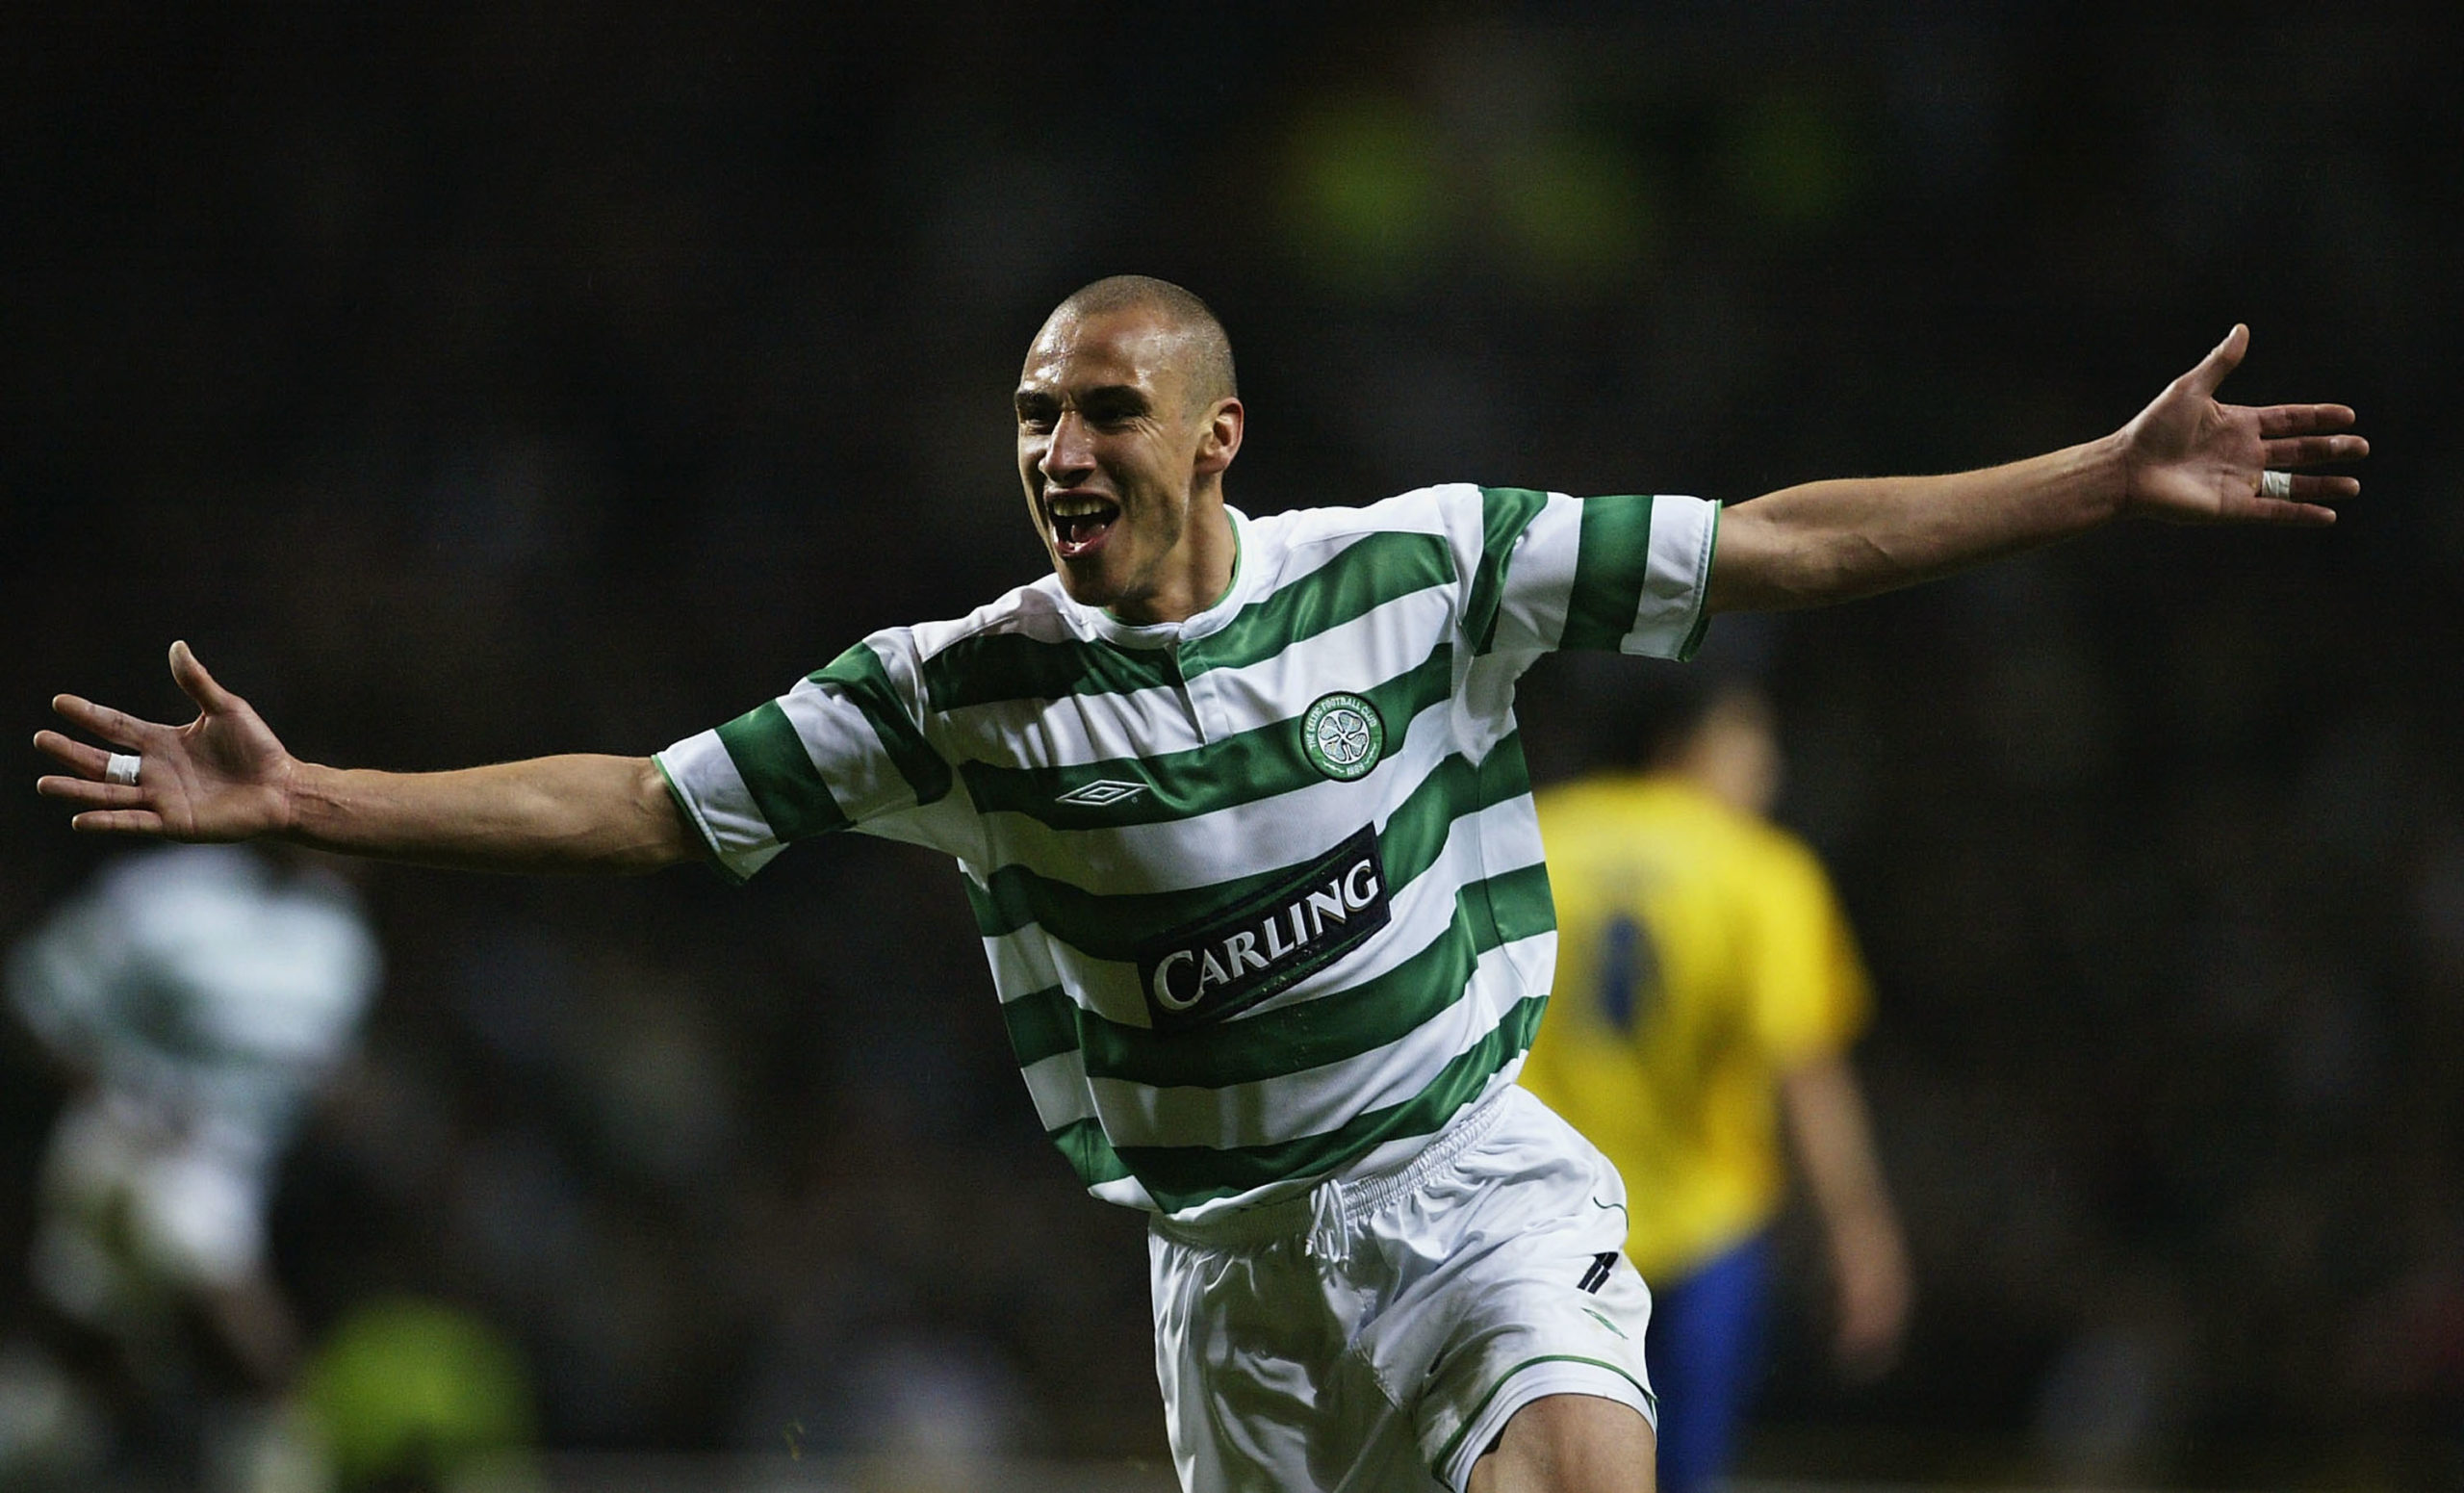 "They would be building a statue"; former Celtic man tips Henrik Larsson for top job